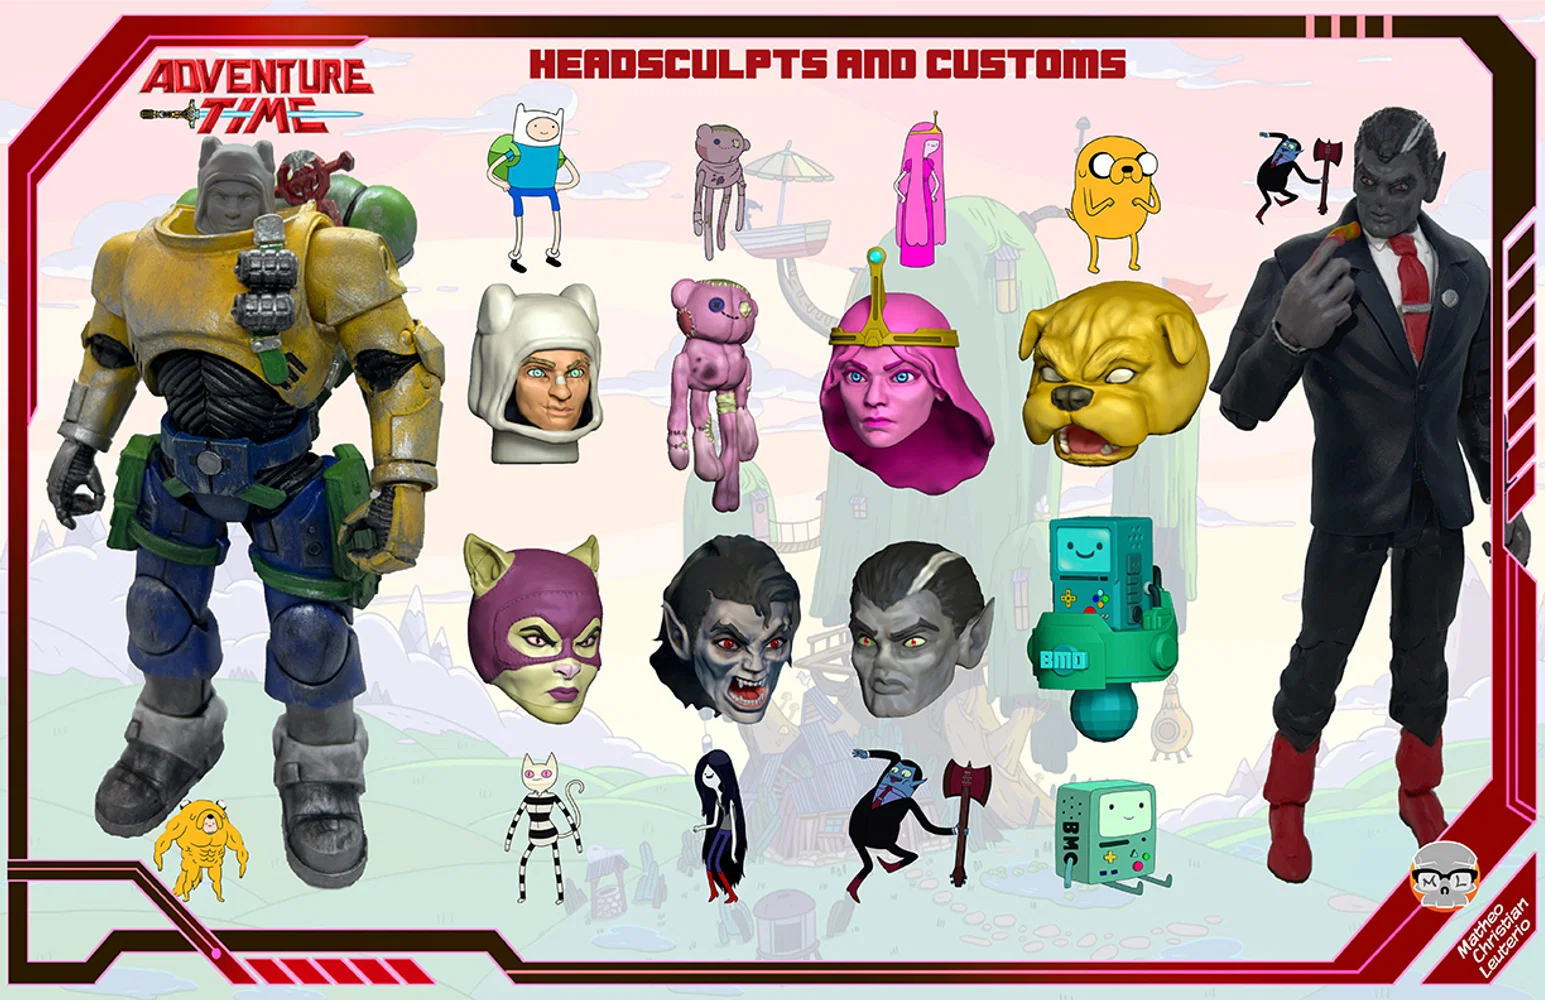 Adventure Time Headsculpts and Customs